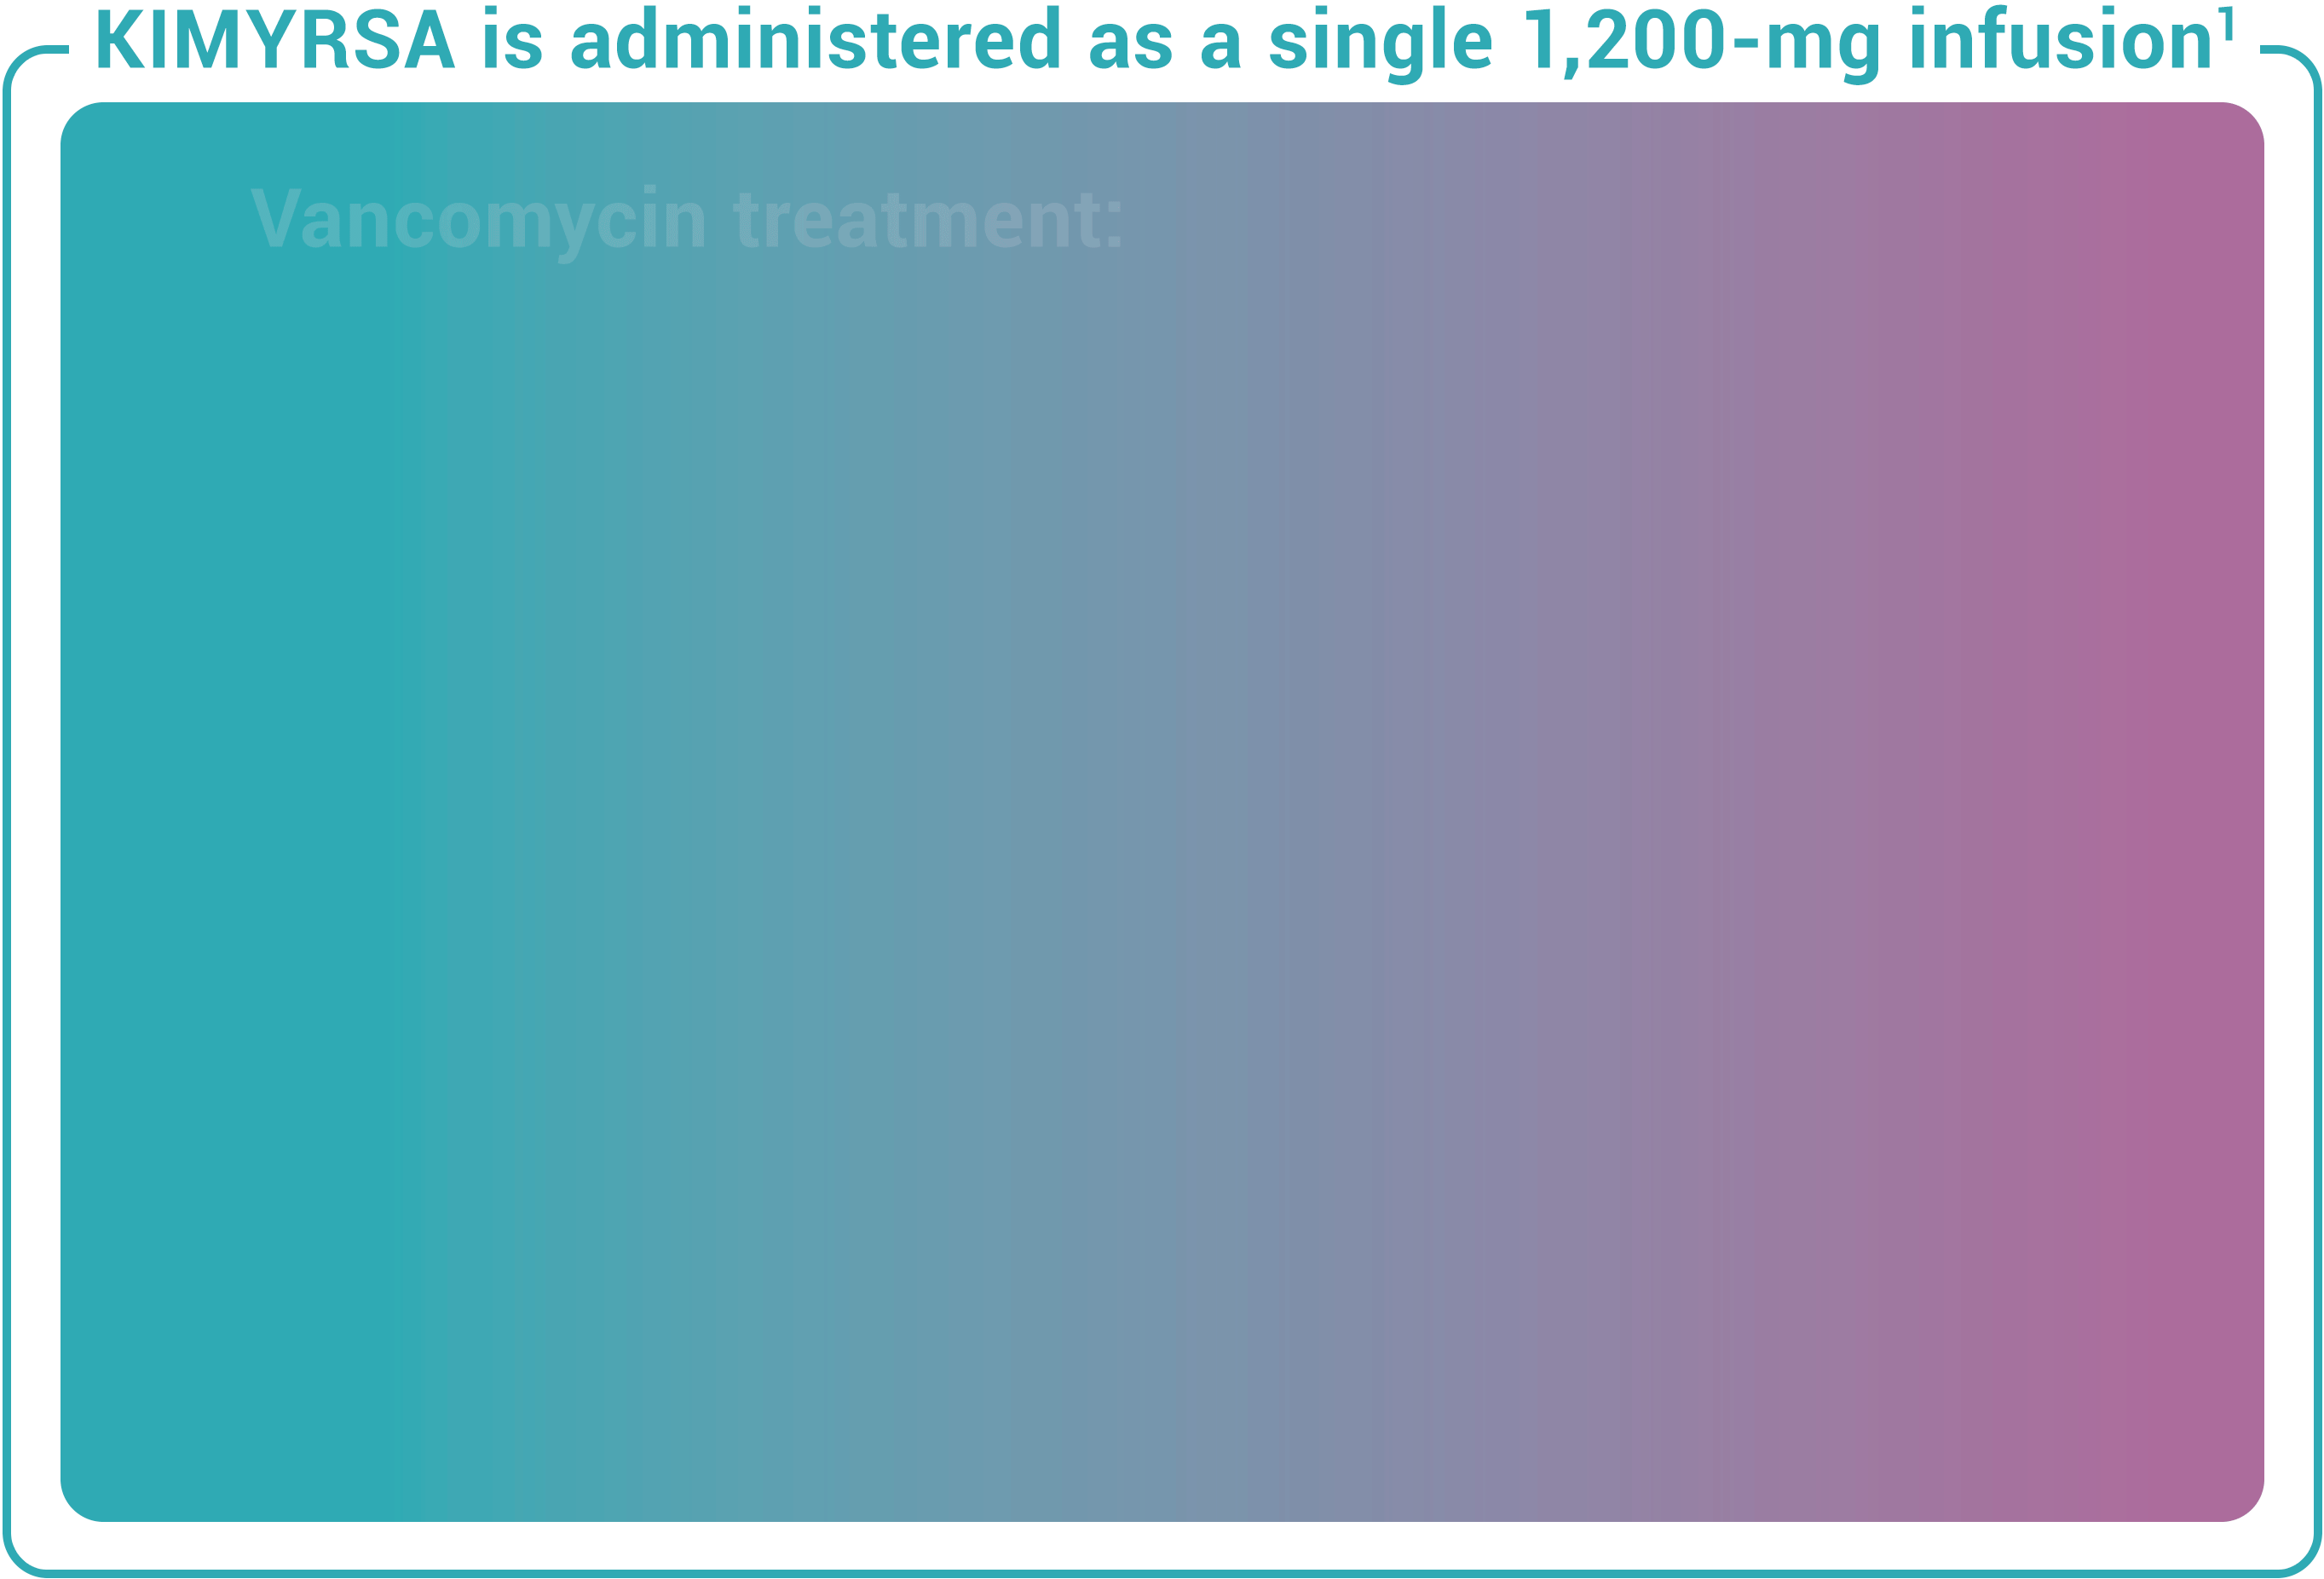 KIMYRSA is administered as a single 1,200-mg infusion(1); Vancomycin treatment: up to 20 infusions(5,6); Daptomycin treatment: up to 14 infusions(7); KIMYRSA: a single, 1-hour infusion(1)